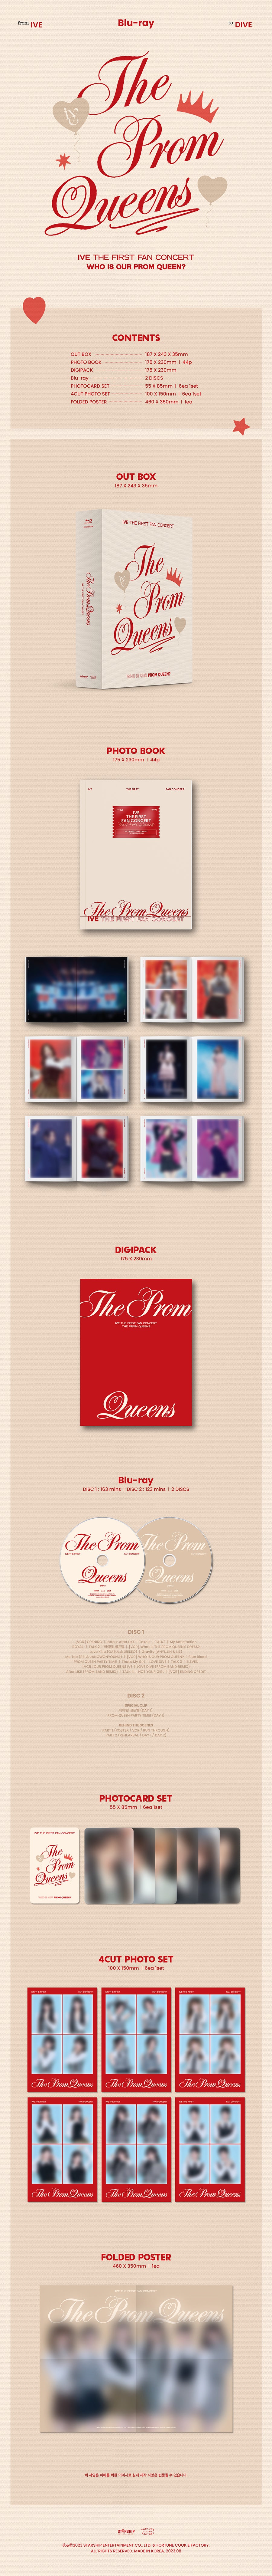 IVE THE FIRST FAN CONCERT 'THE PROM QUEENS' (BLU-RAY) DETAIL